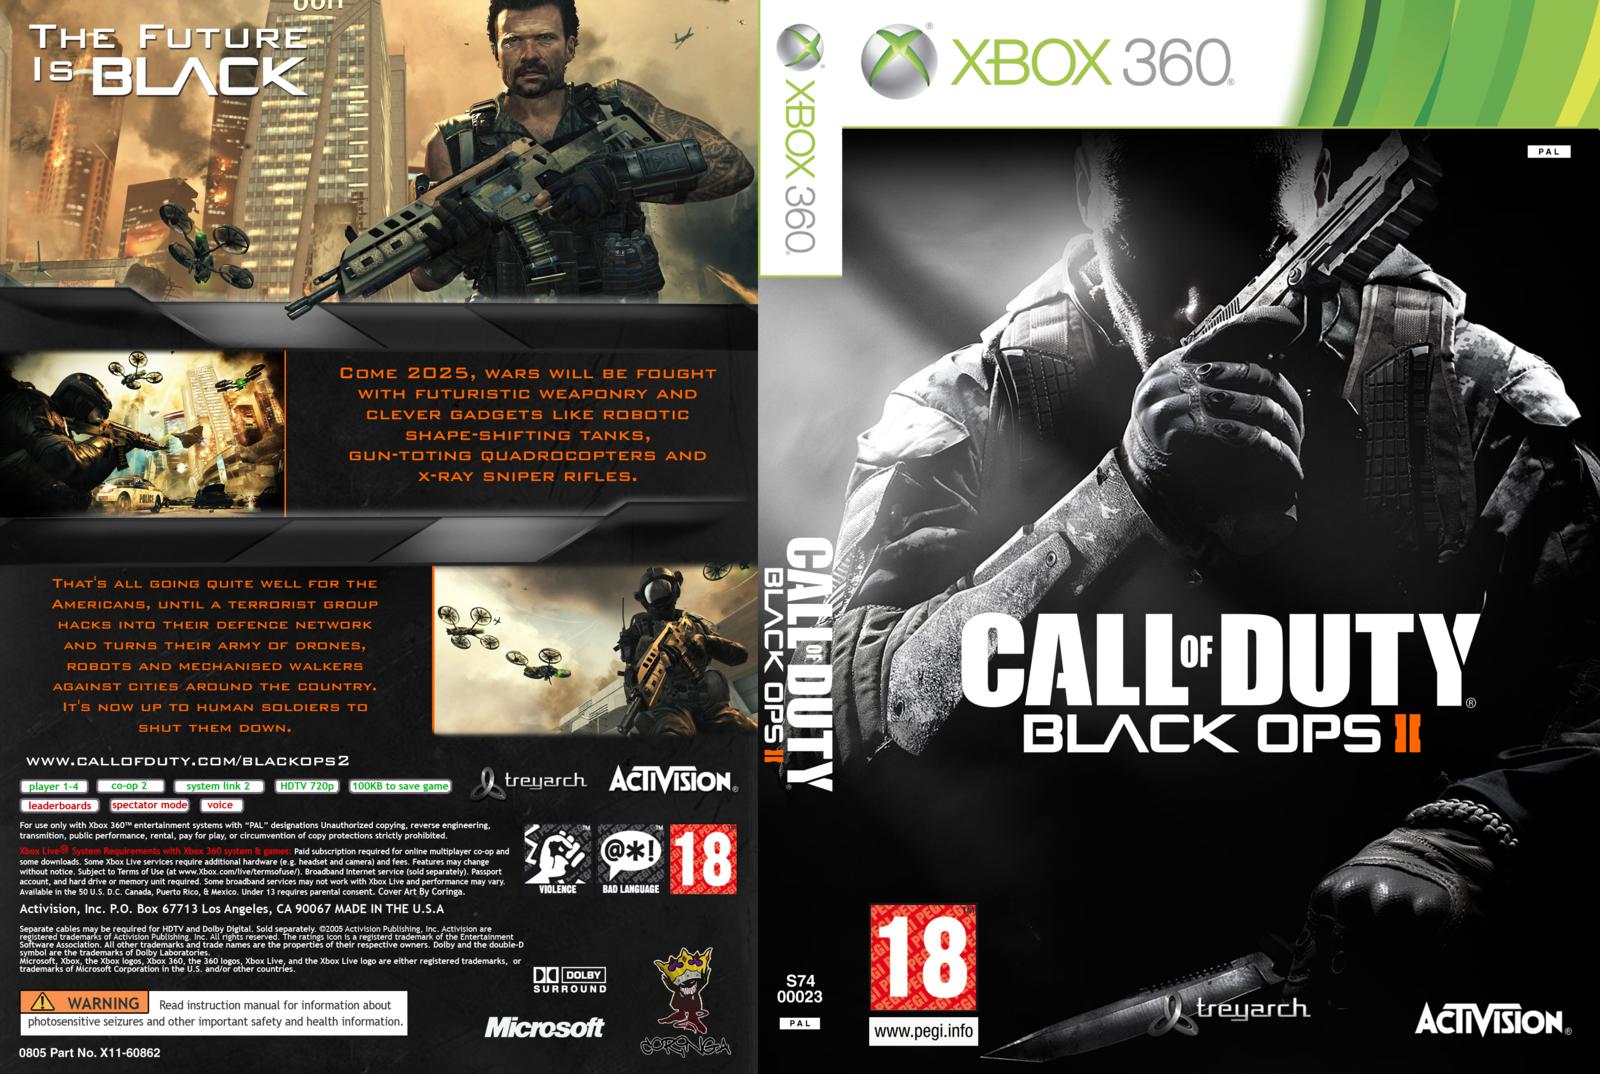 Call of duty xbox game. Black ops Xbox 360. Call of Duty Black ops 2 диск на иксбокс 360. Cod Black ops 2 обложка Xbox 360. Black ops 1 Xbox 360.